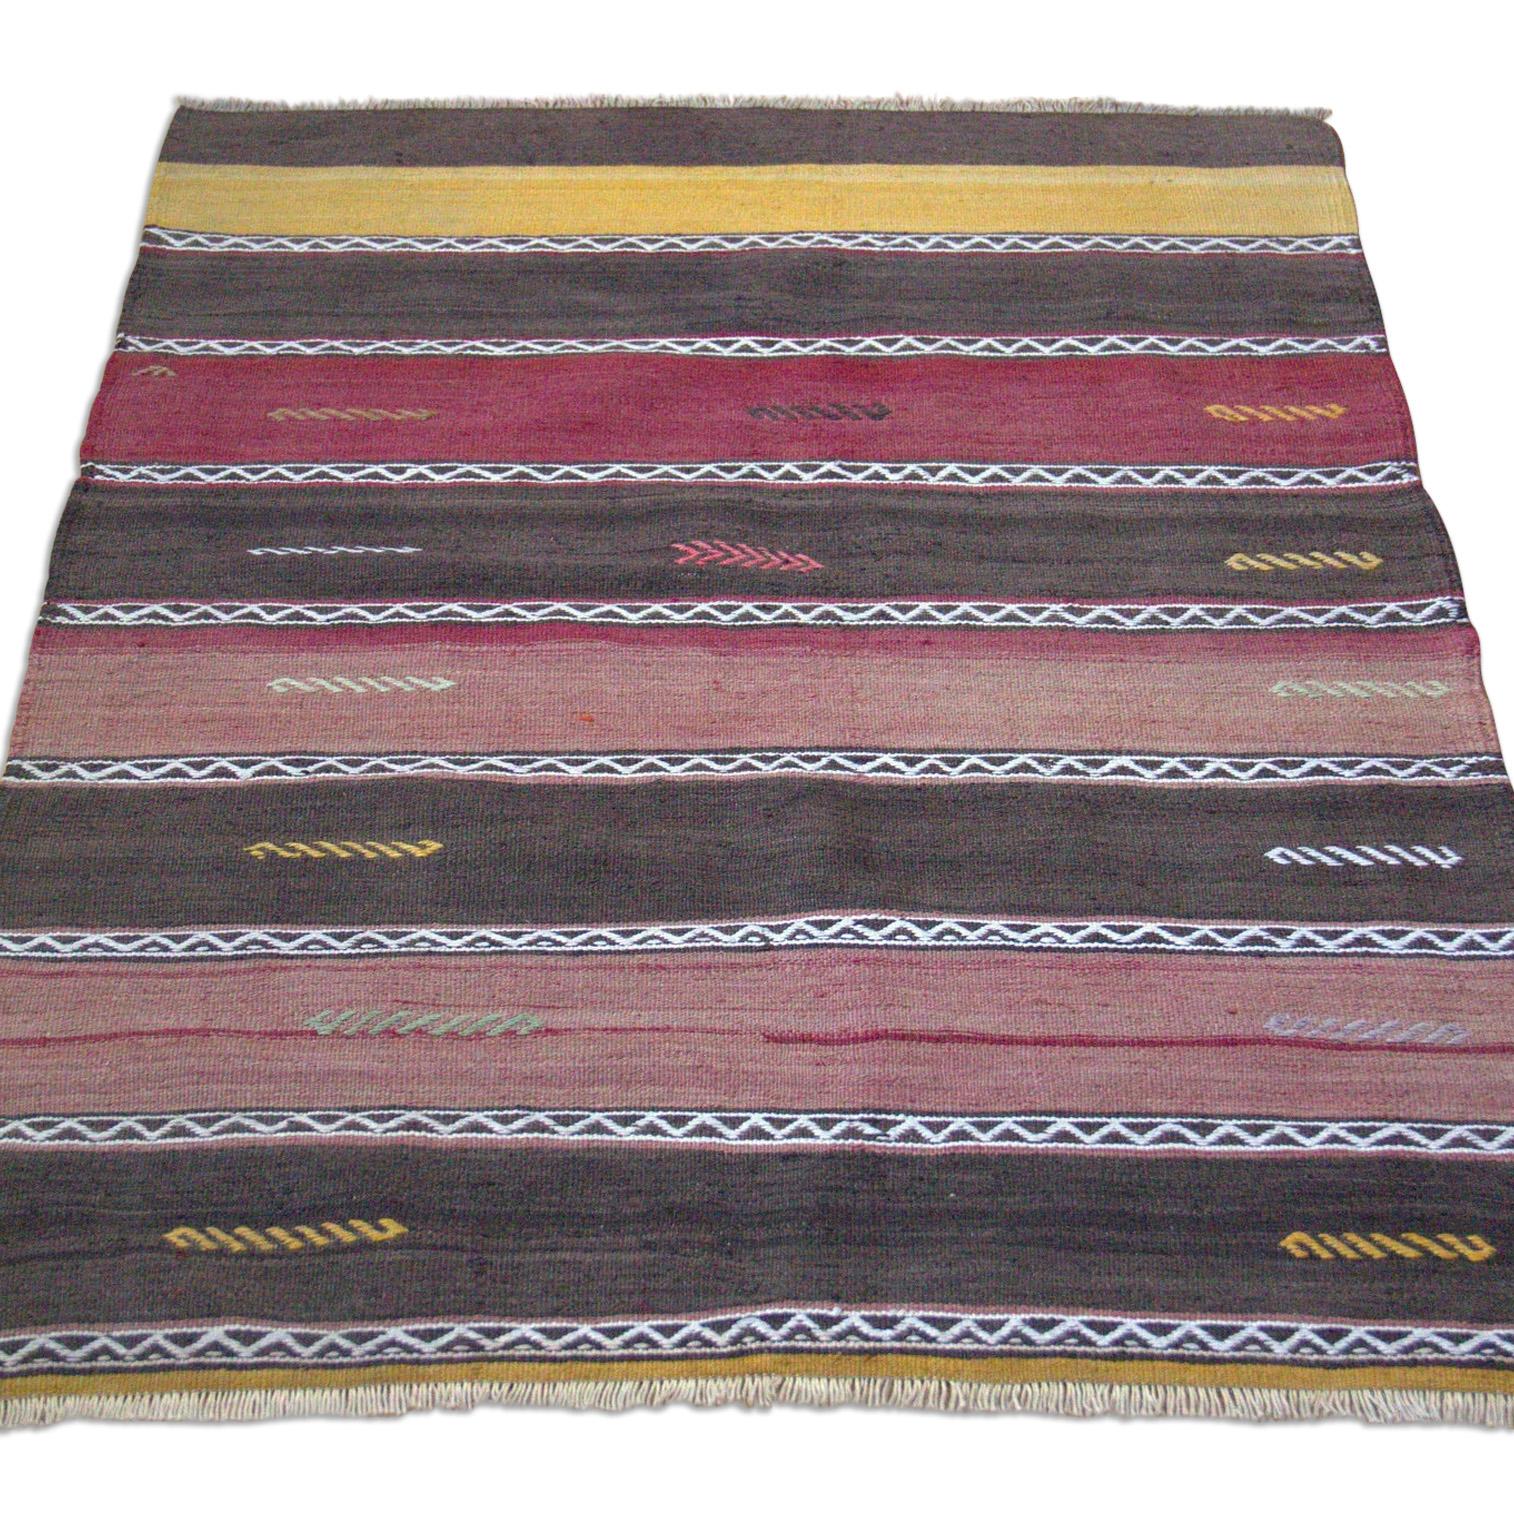 From one of the villages surrounding the city of Aksaray in Central Anatolia of Turkey, this Kilim rug was handwoven in the mid-20th century for use as a dowry piece. Smaller in size, these types of rugs were woven to fill small spaces and other